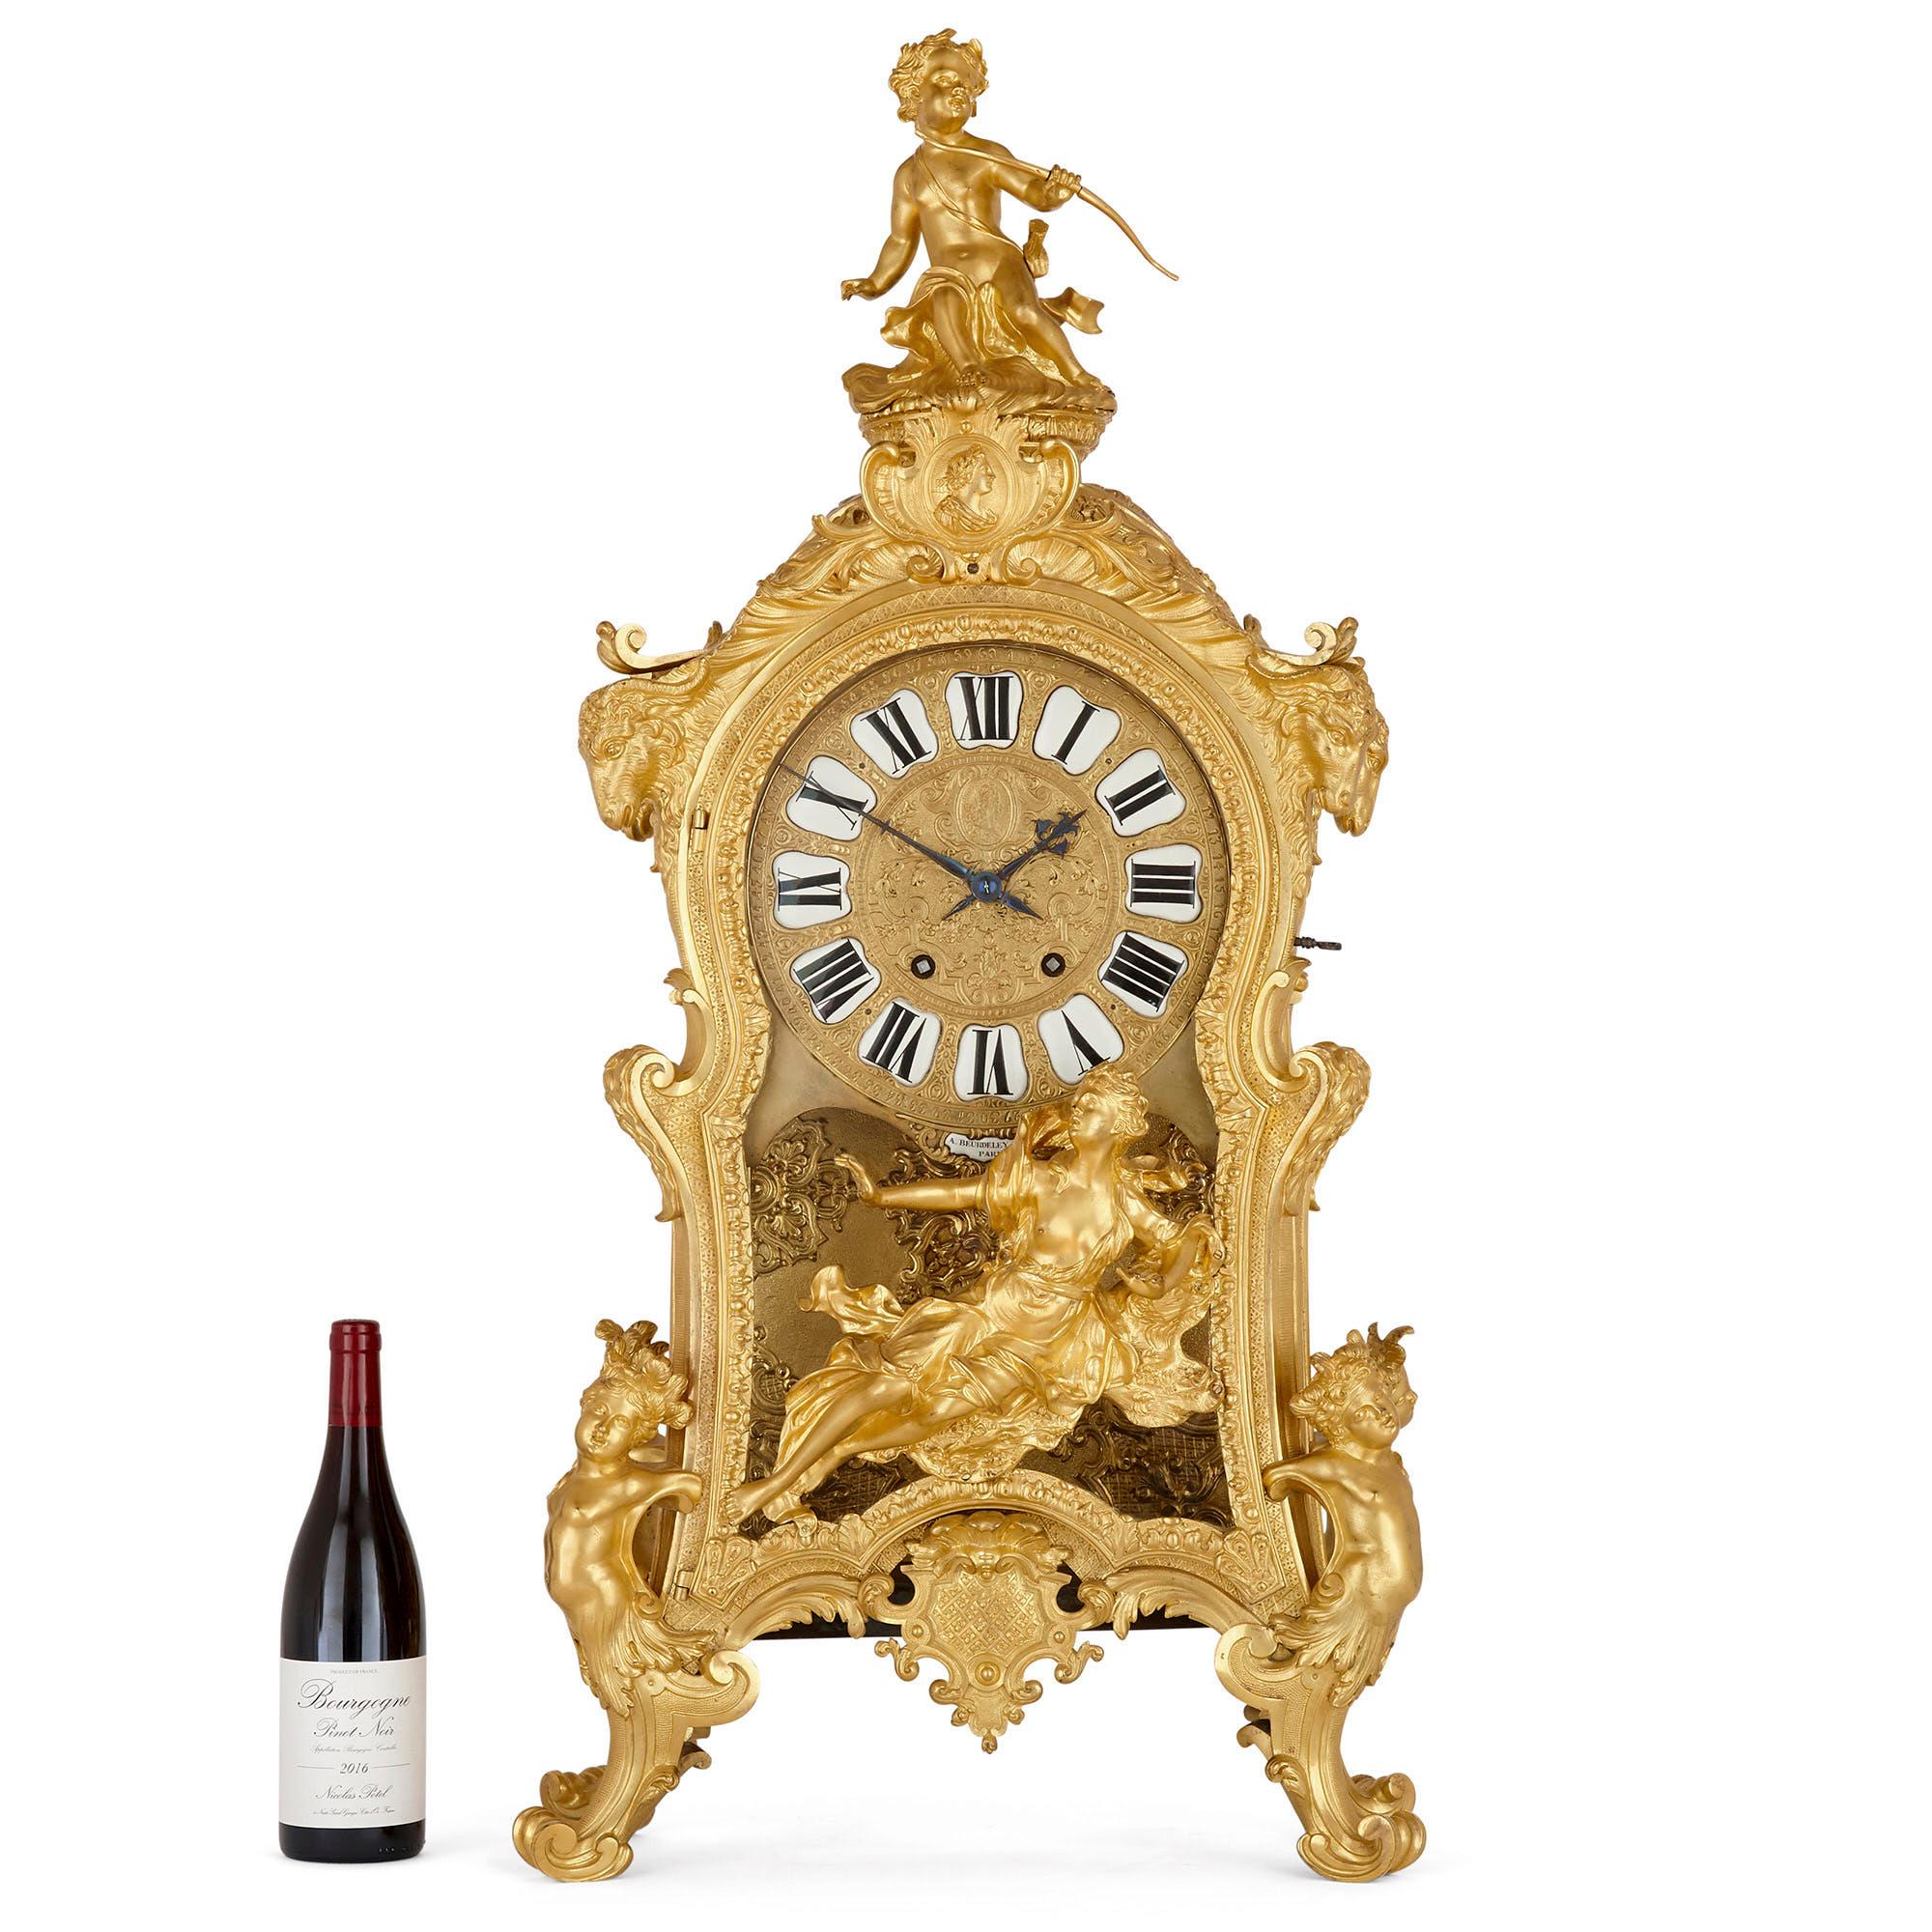 Very large Louis XV style gilt bronze mantel clock by Beurdeley
French, circa 1880
Measures: Height 102cm, width 48cm, depth 29cm

This very large mantel clock is a magnificent example of 19th century French decorative art by one of its very